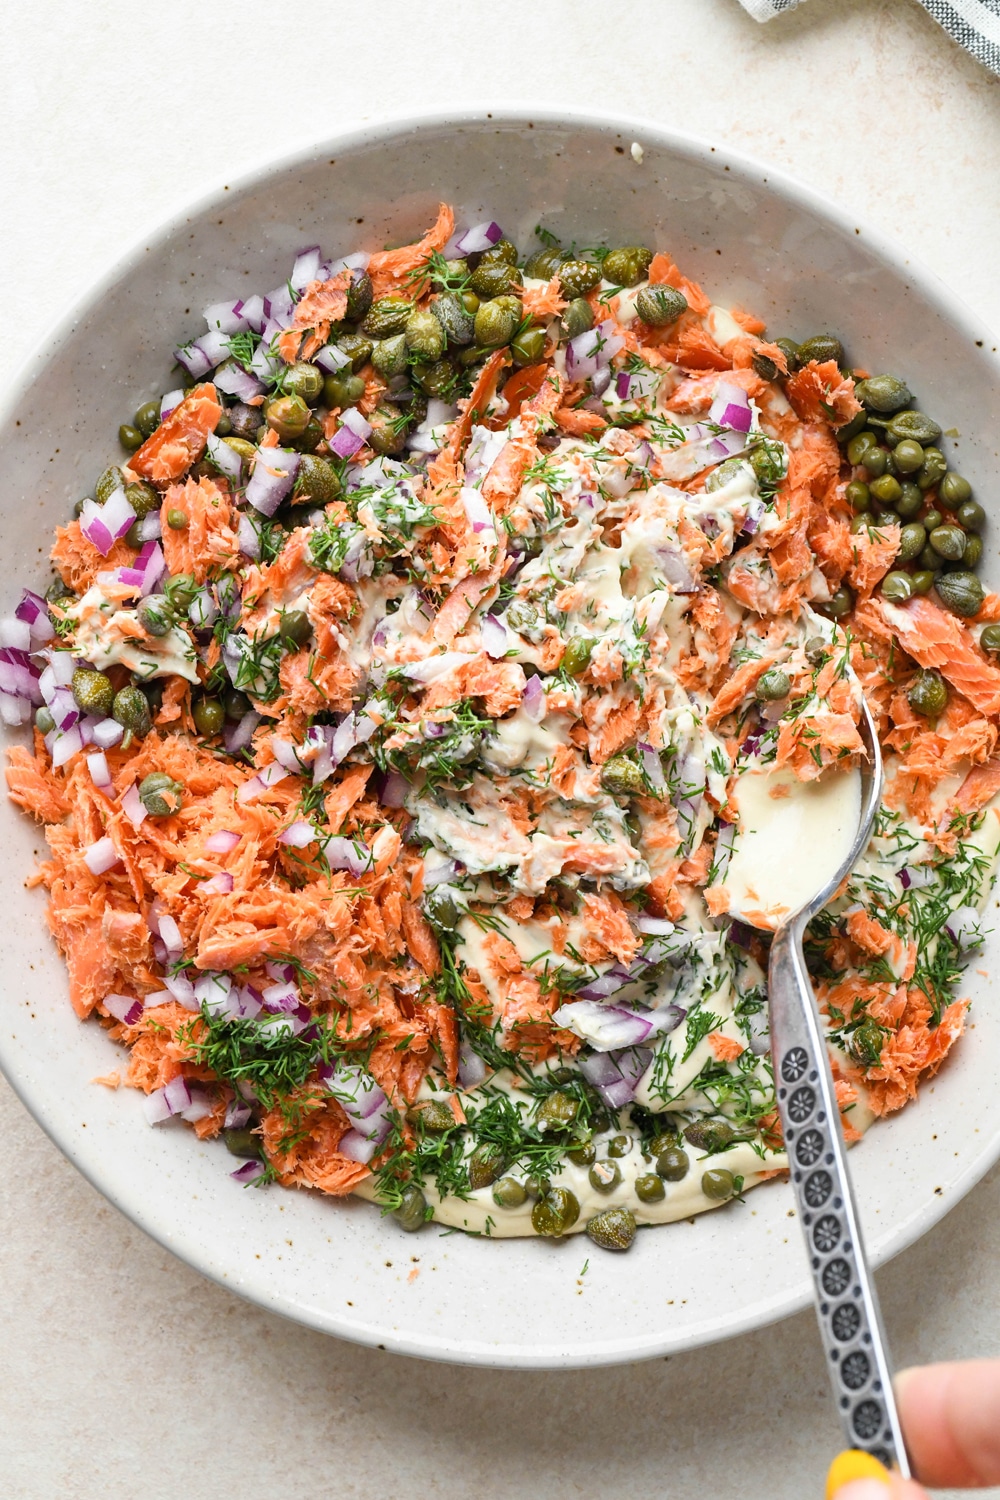 How to make dairy free smoked salmon dip: Mixing the smoked salmon, capers, dill, and red onion into the cashew cream base.